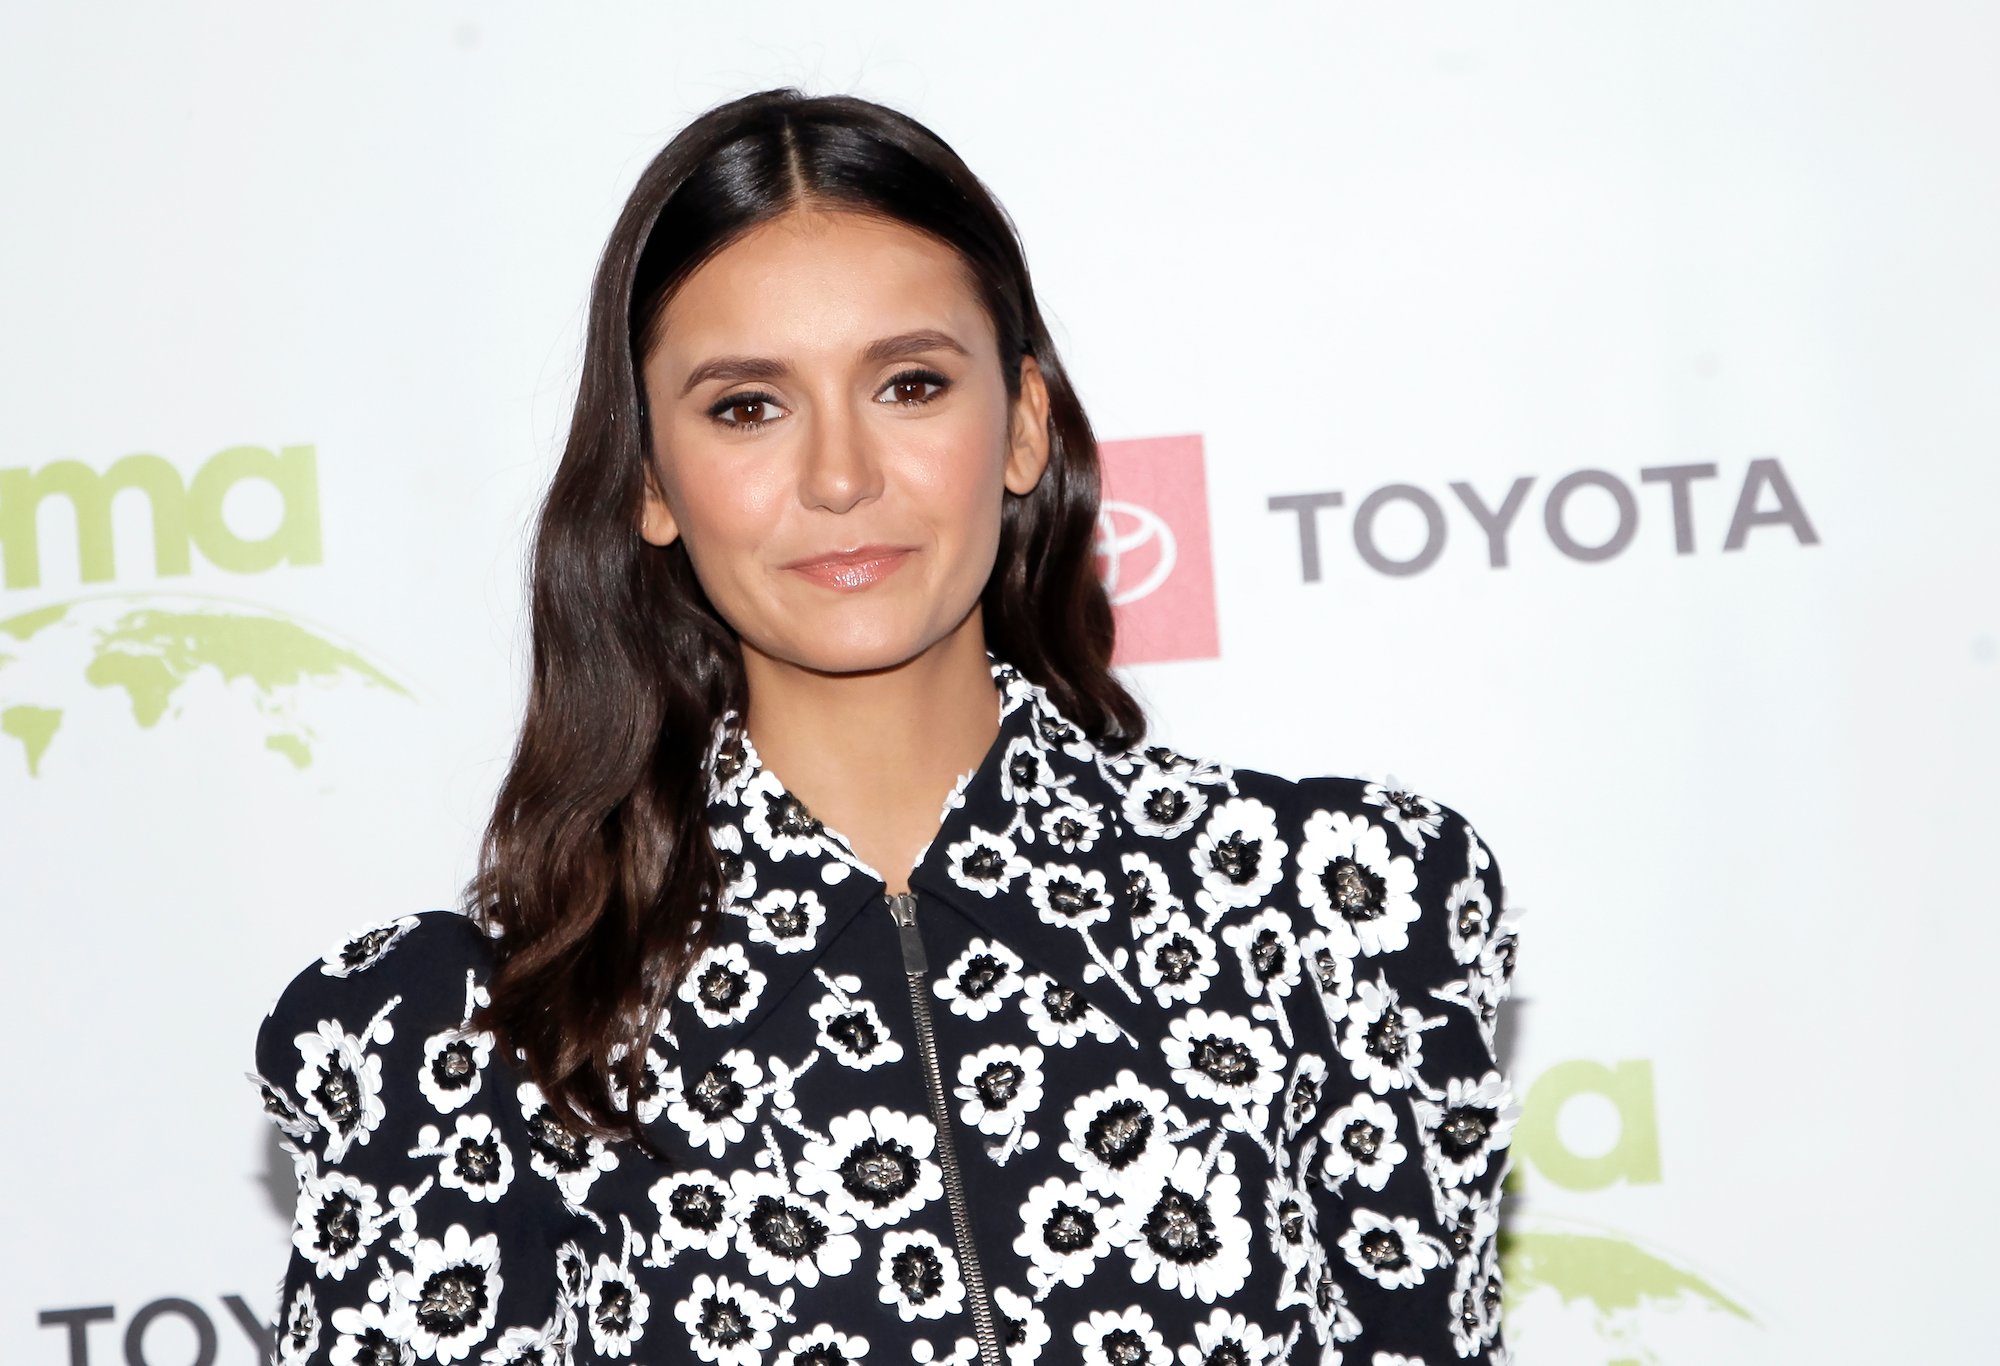 Nina Dobrev Was a ‘Degrassi’ Star Before Landing Her ‘Vampire Diaries’ Role